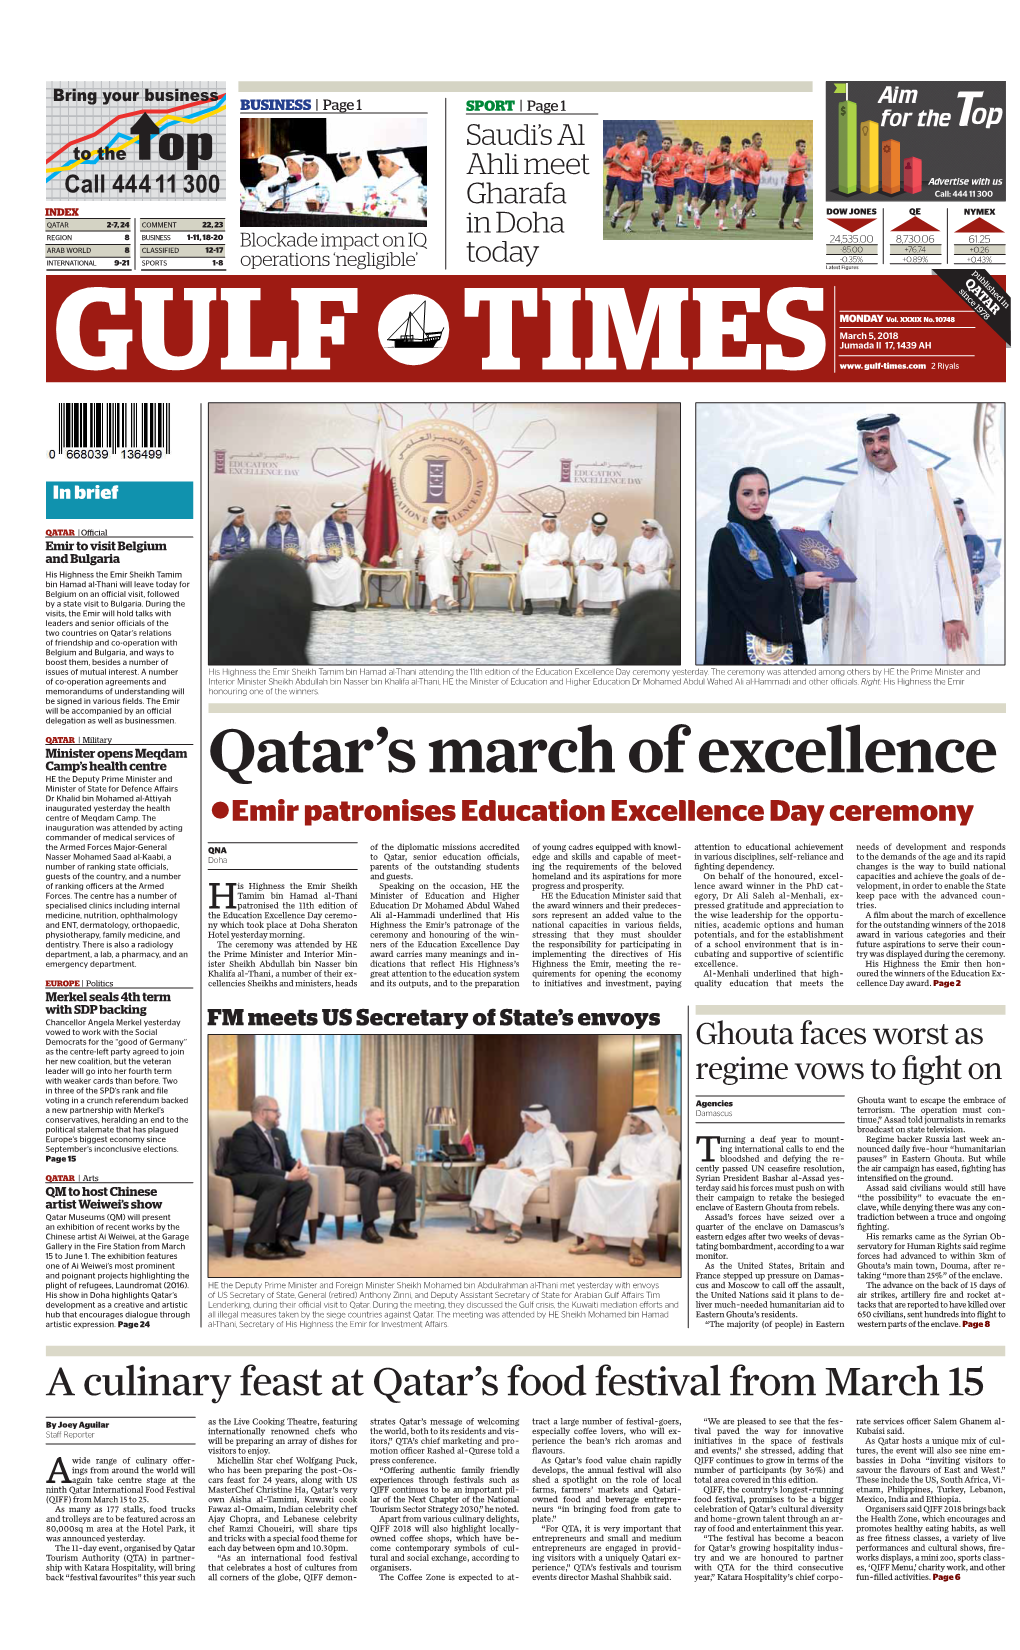 Qatar's March of Excellence